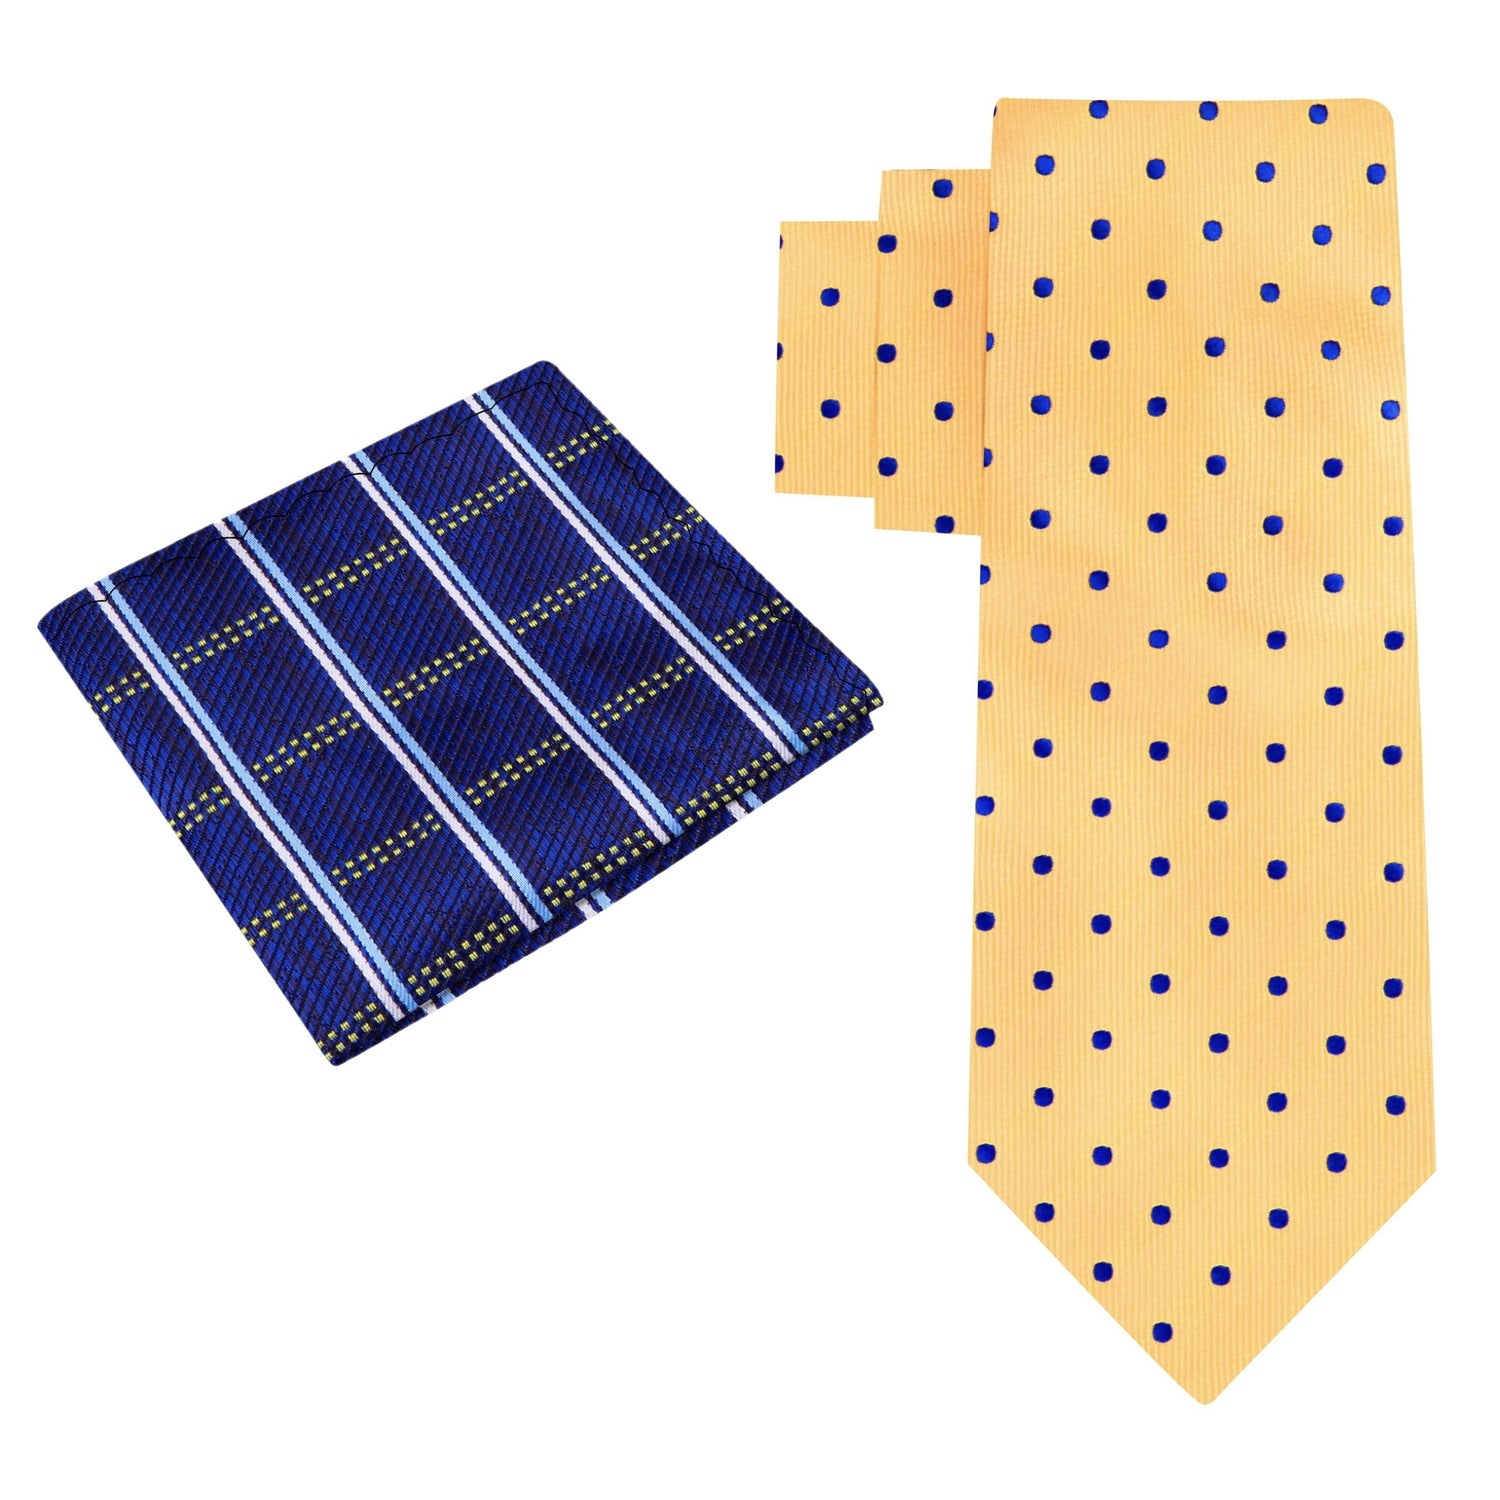 Alt View: Yellow with Blue Dots Necktie and Blue, White, Yellow Plaid Square